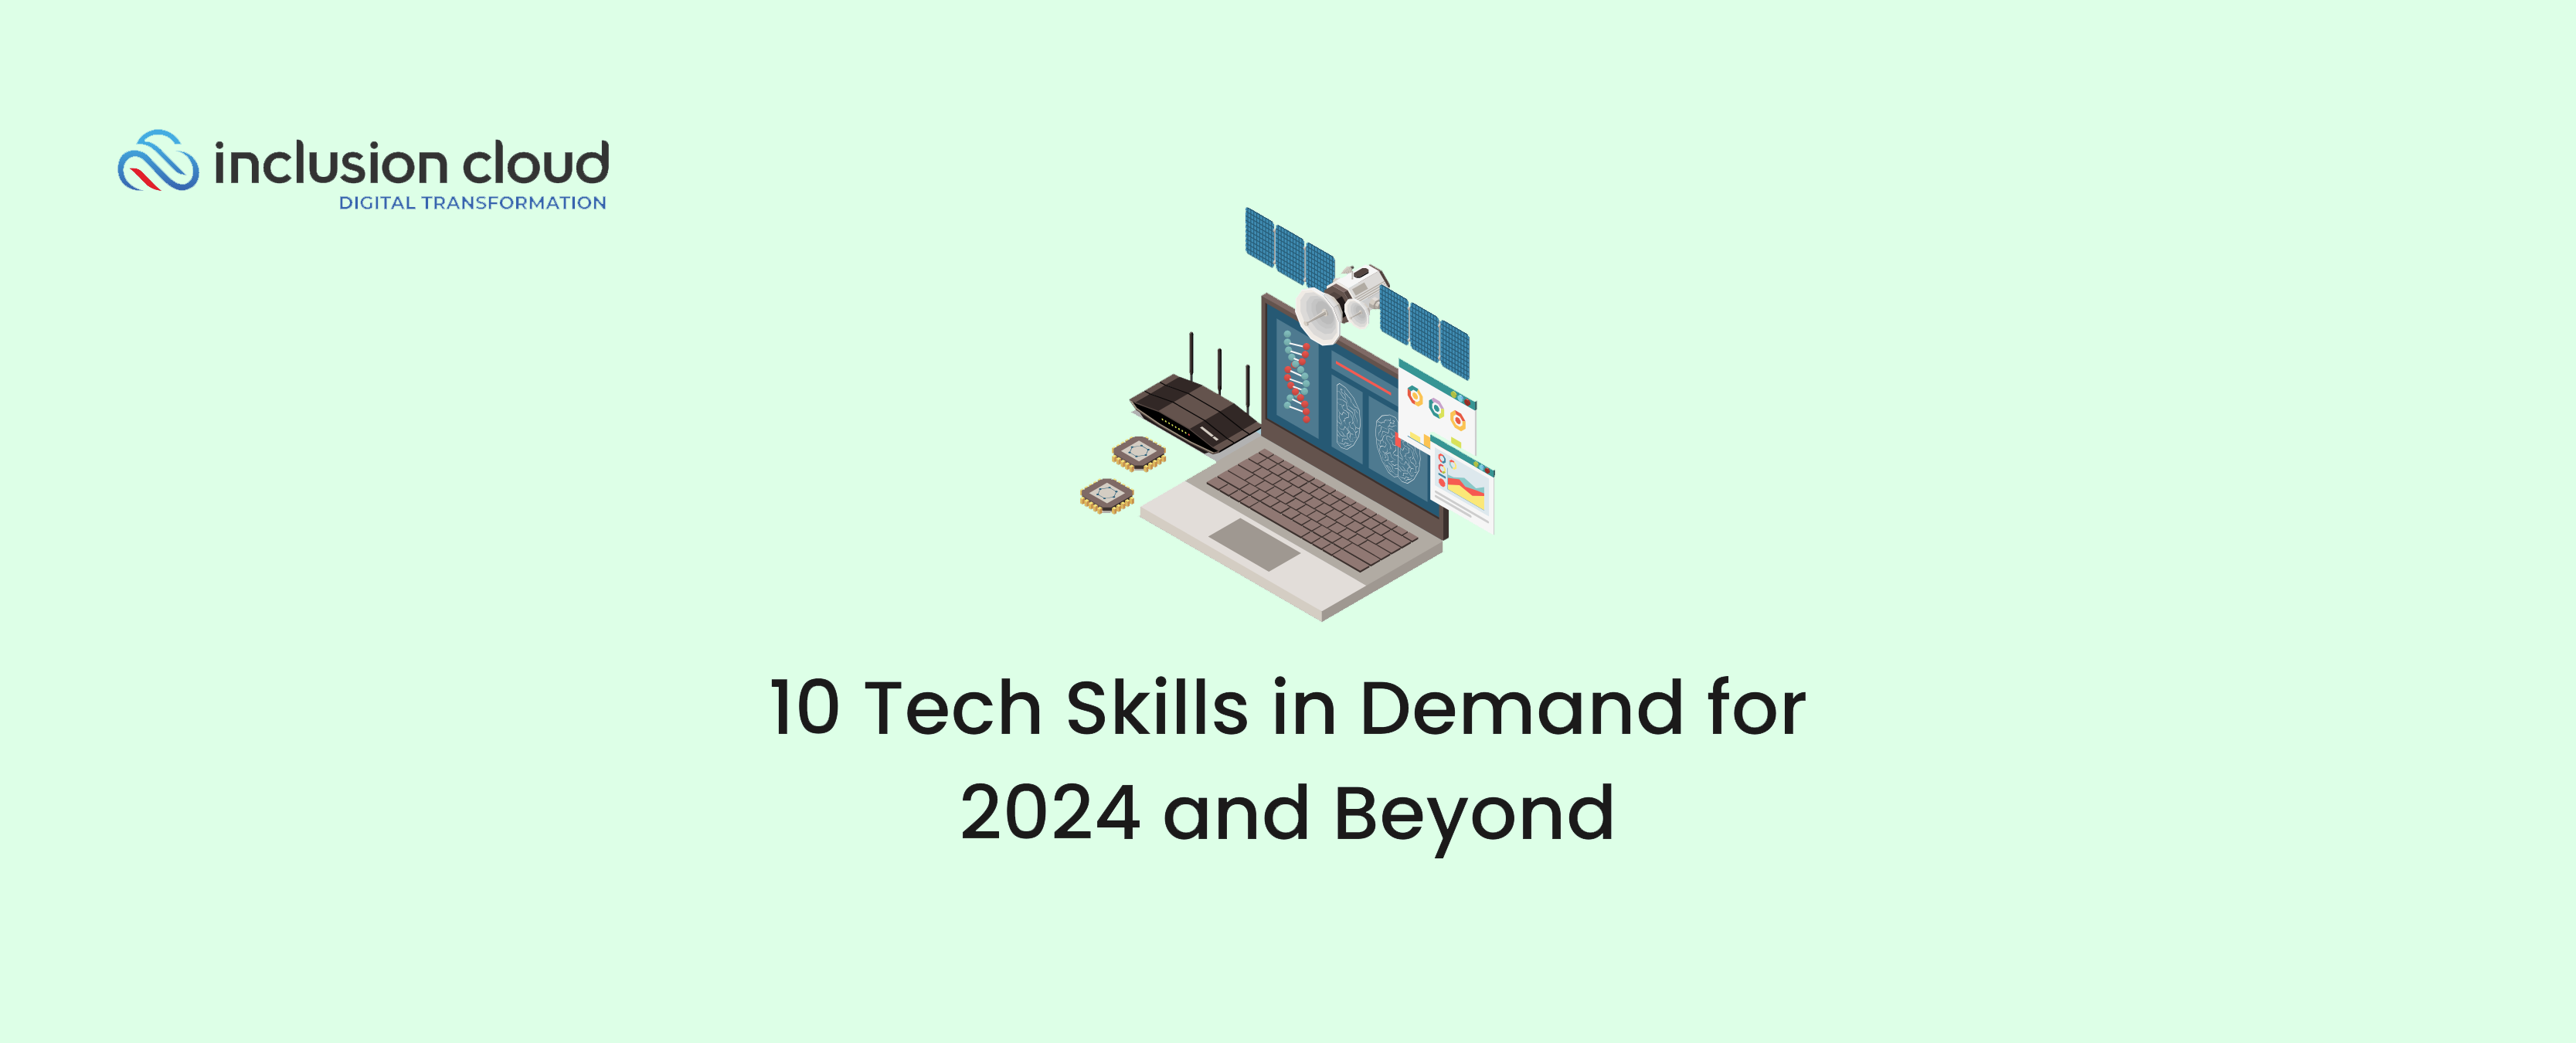 10 Tech Skills in Demand for 2024 and Beyond